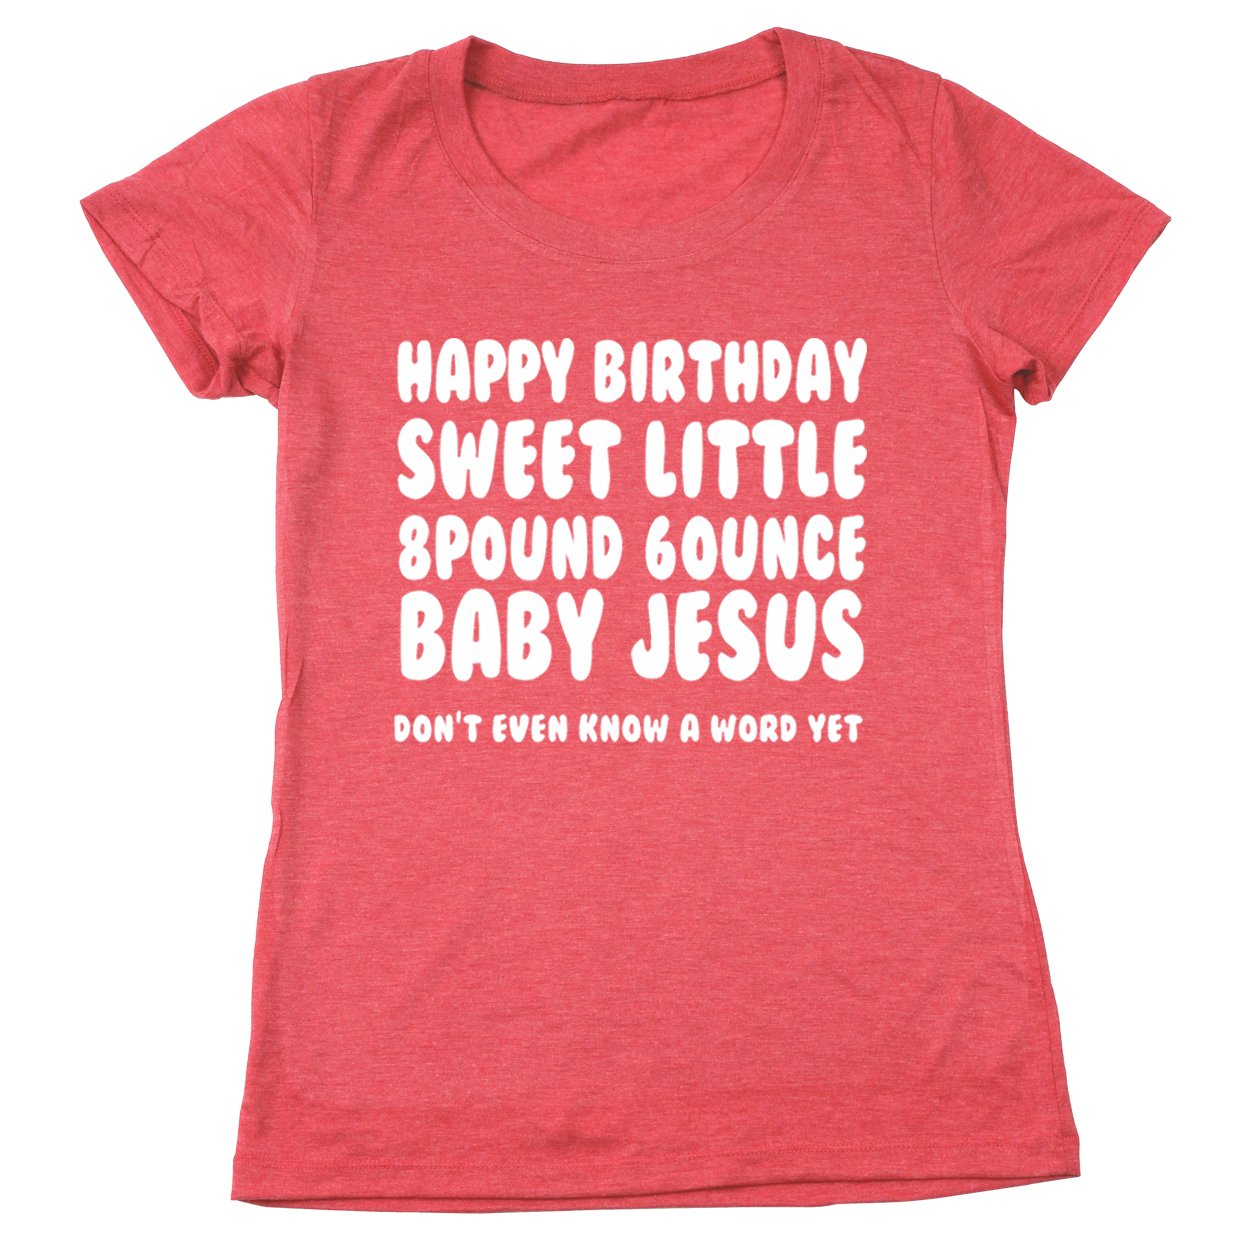 Happy Birthday Baby Jesus Women's Relaxed Fit Tri-Blend T-Shirt